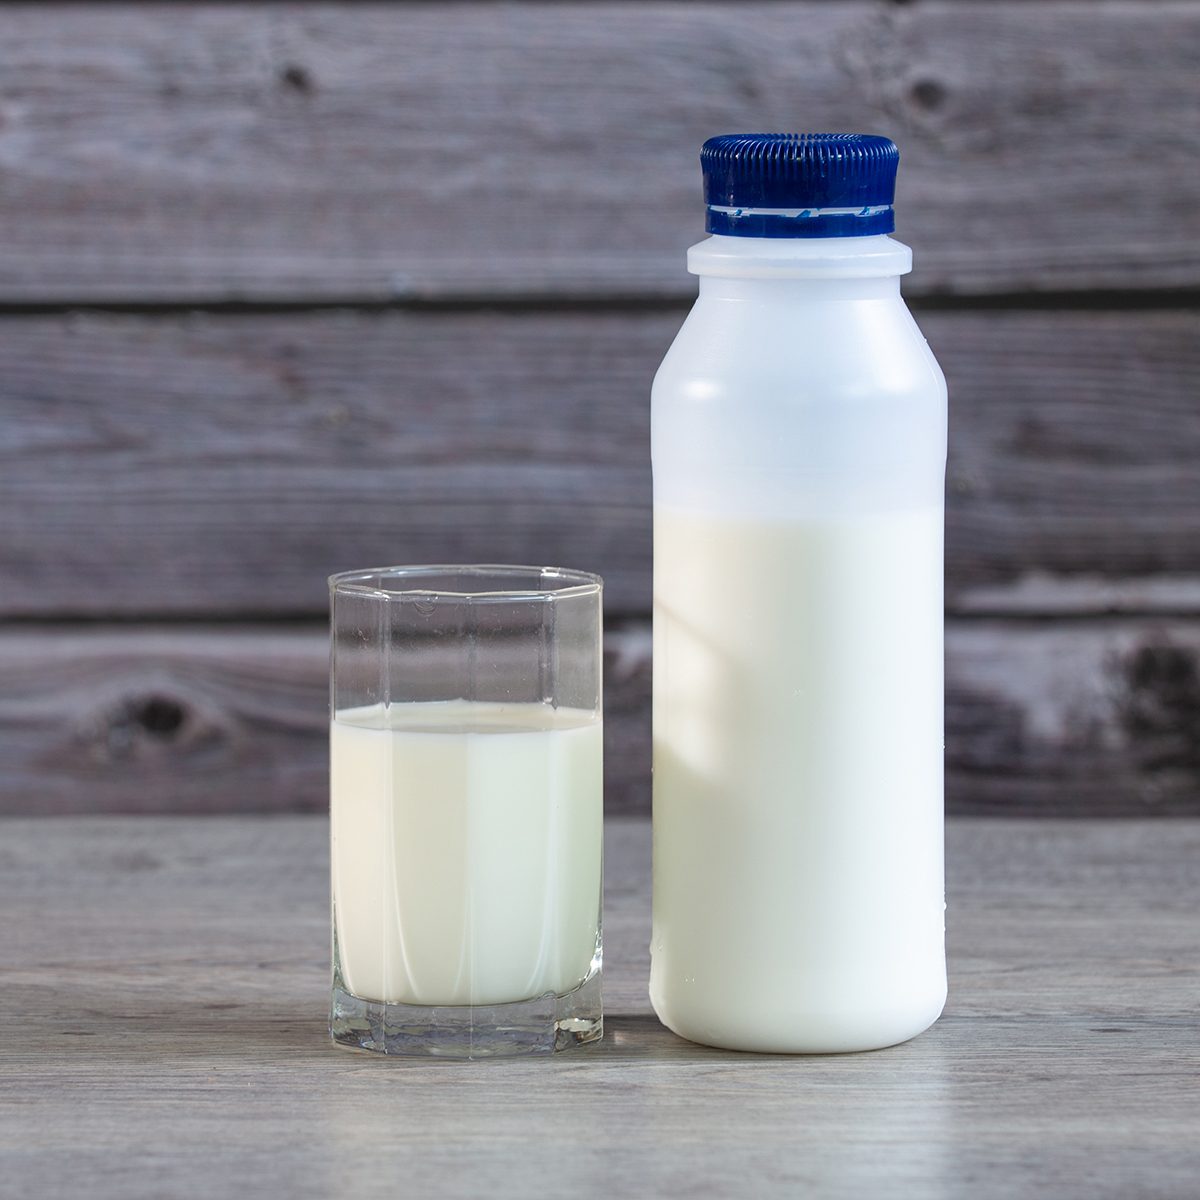 Milk in bottle and Glass of milk on Table